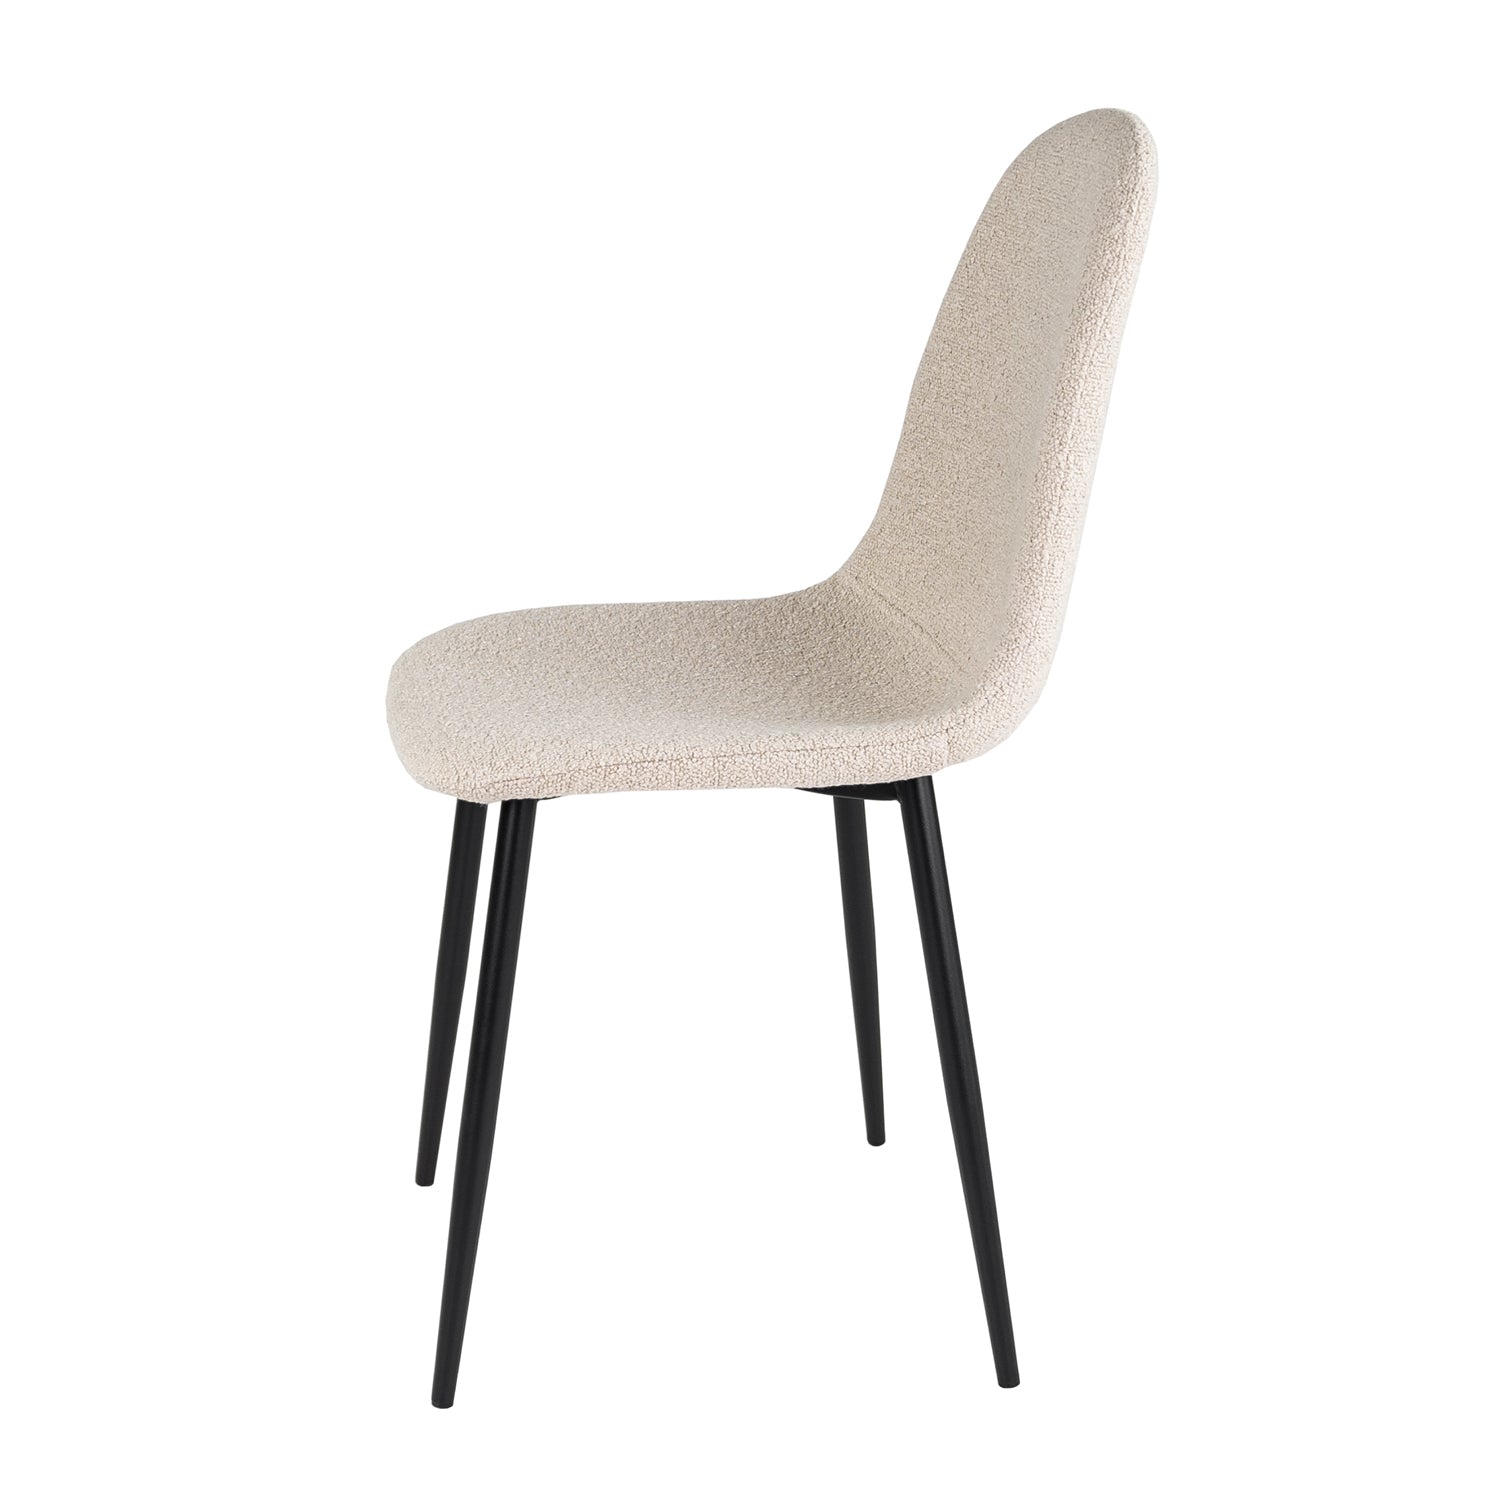 Kick dining room chair Mees